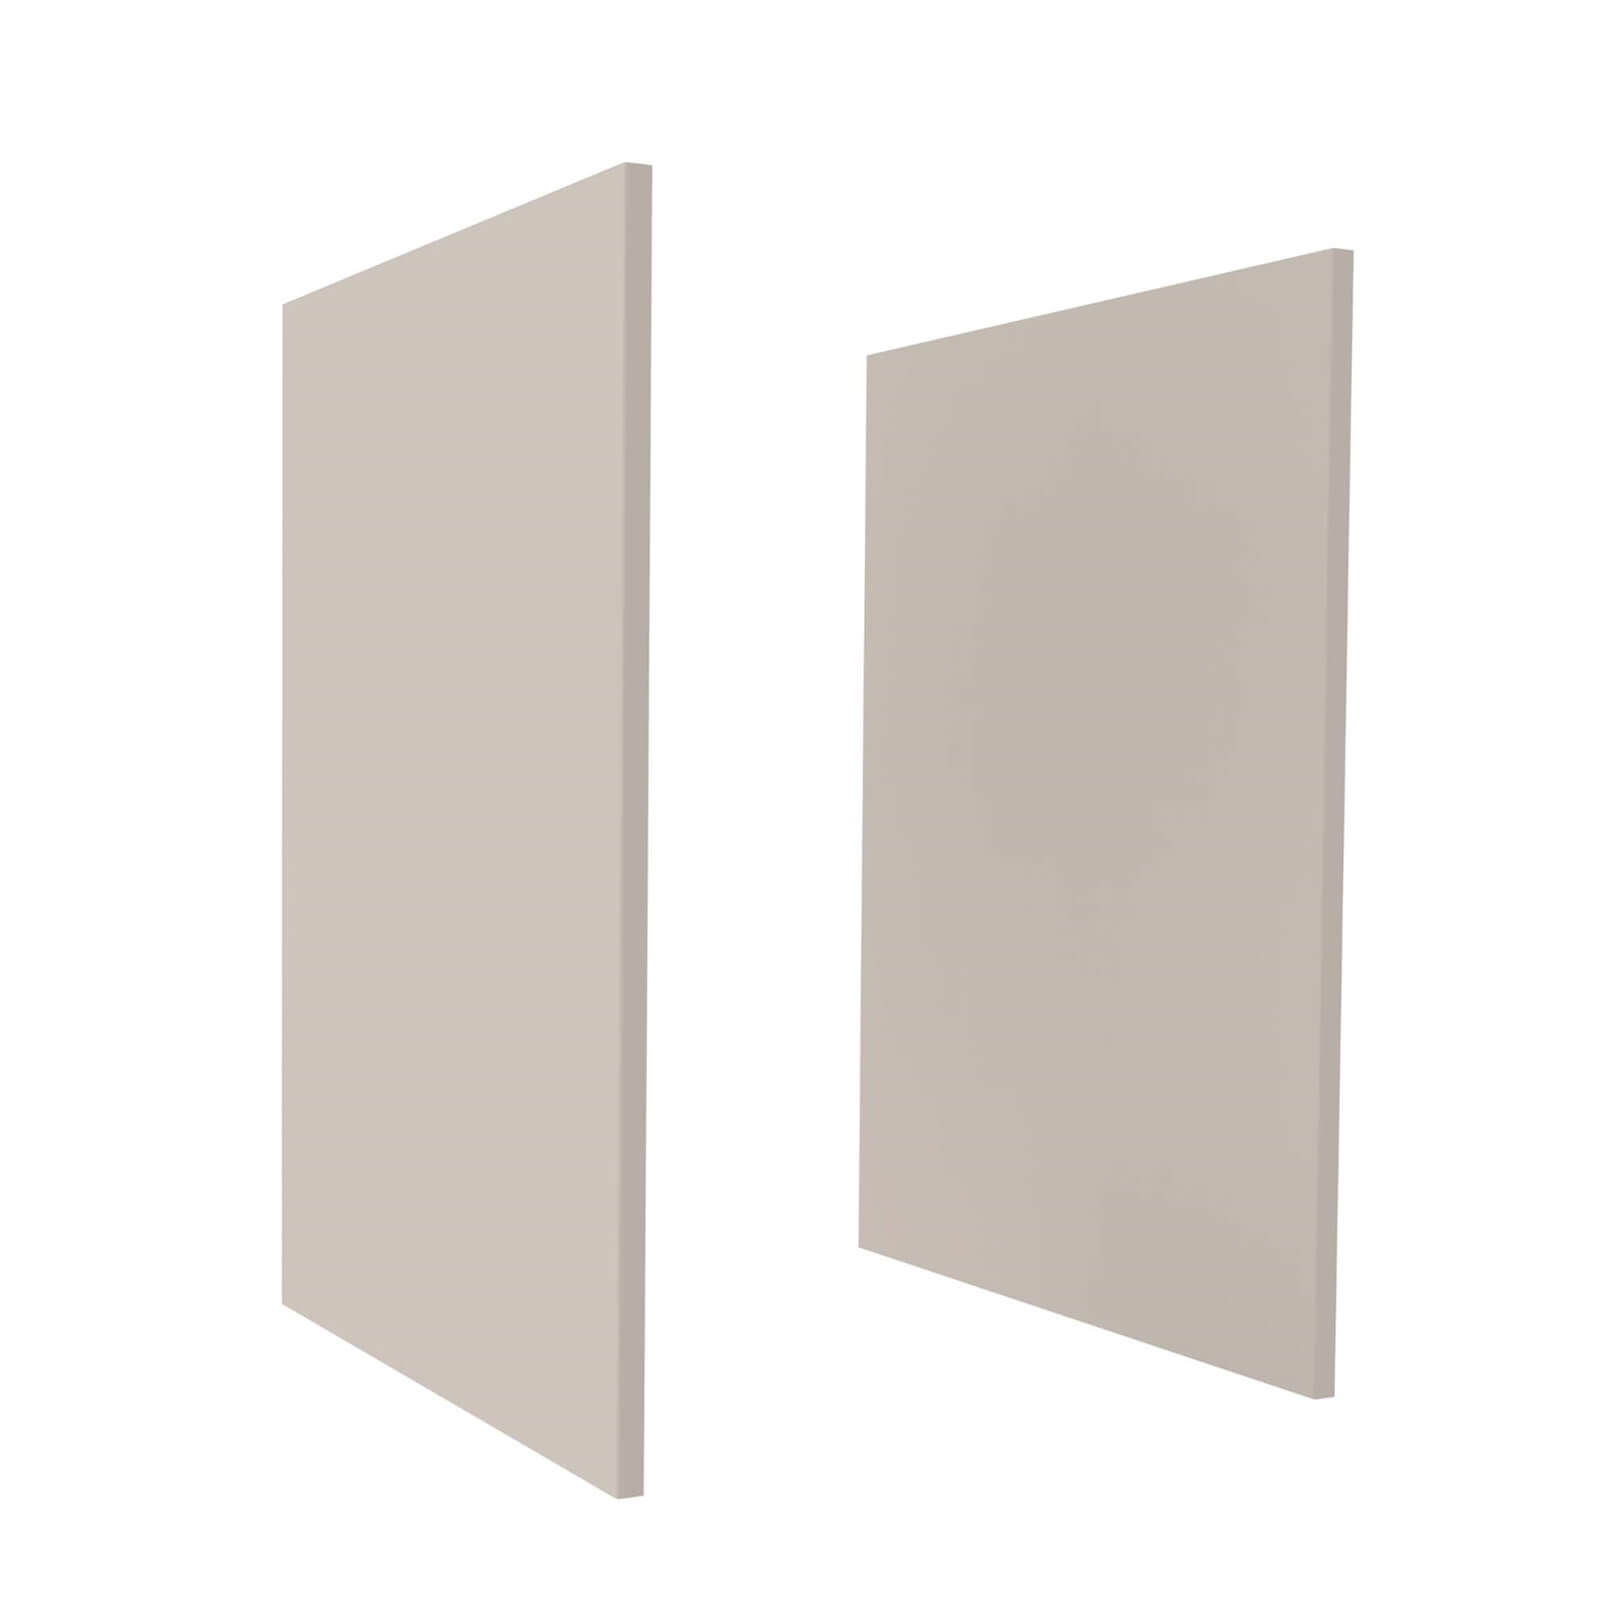 Handleless Cashmere Gloss Base Replacement End Panels - Pair